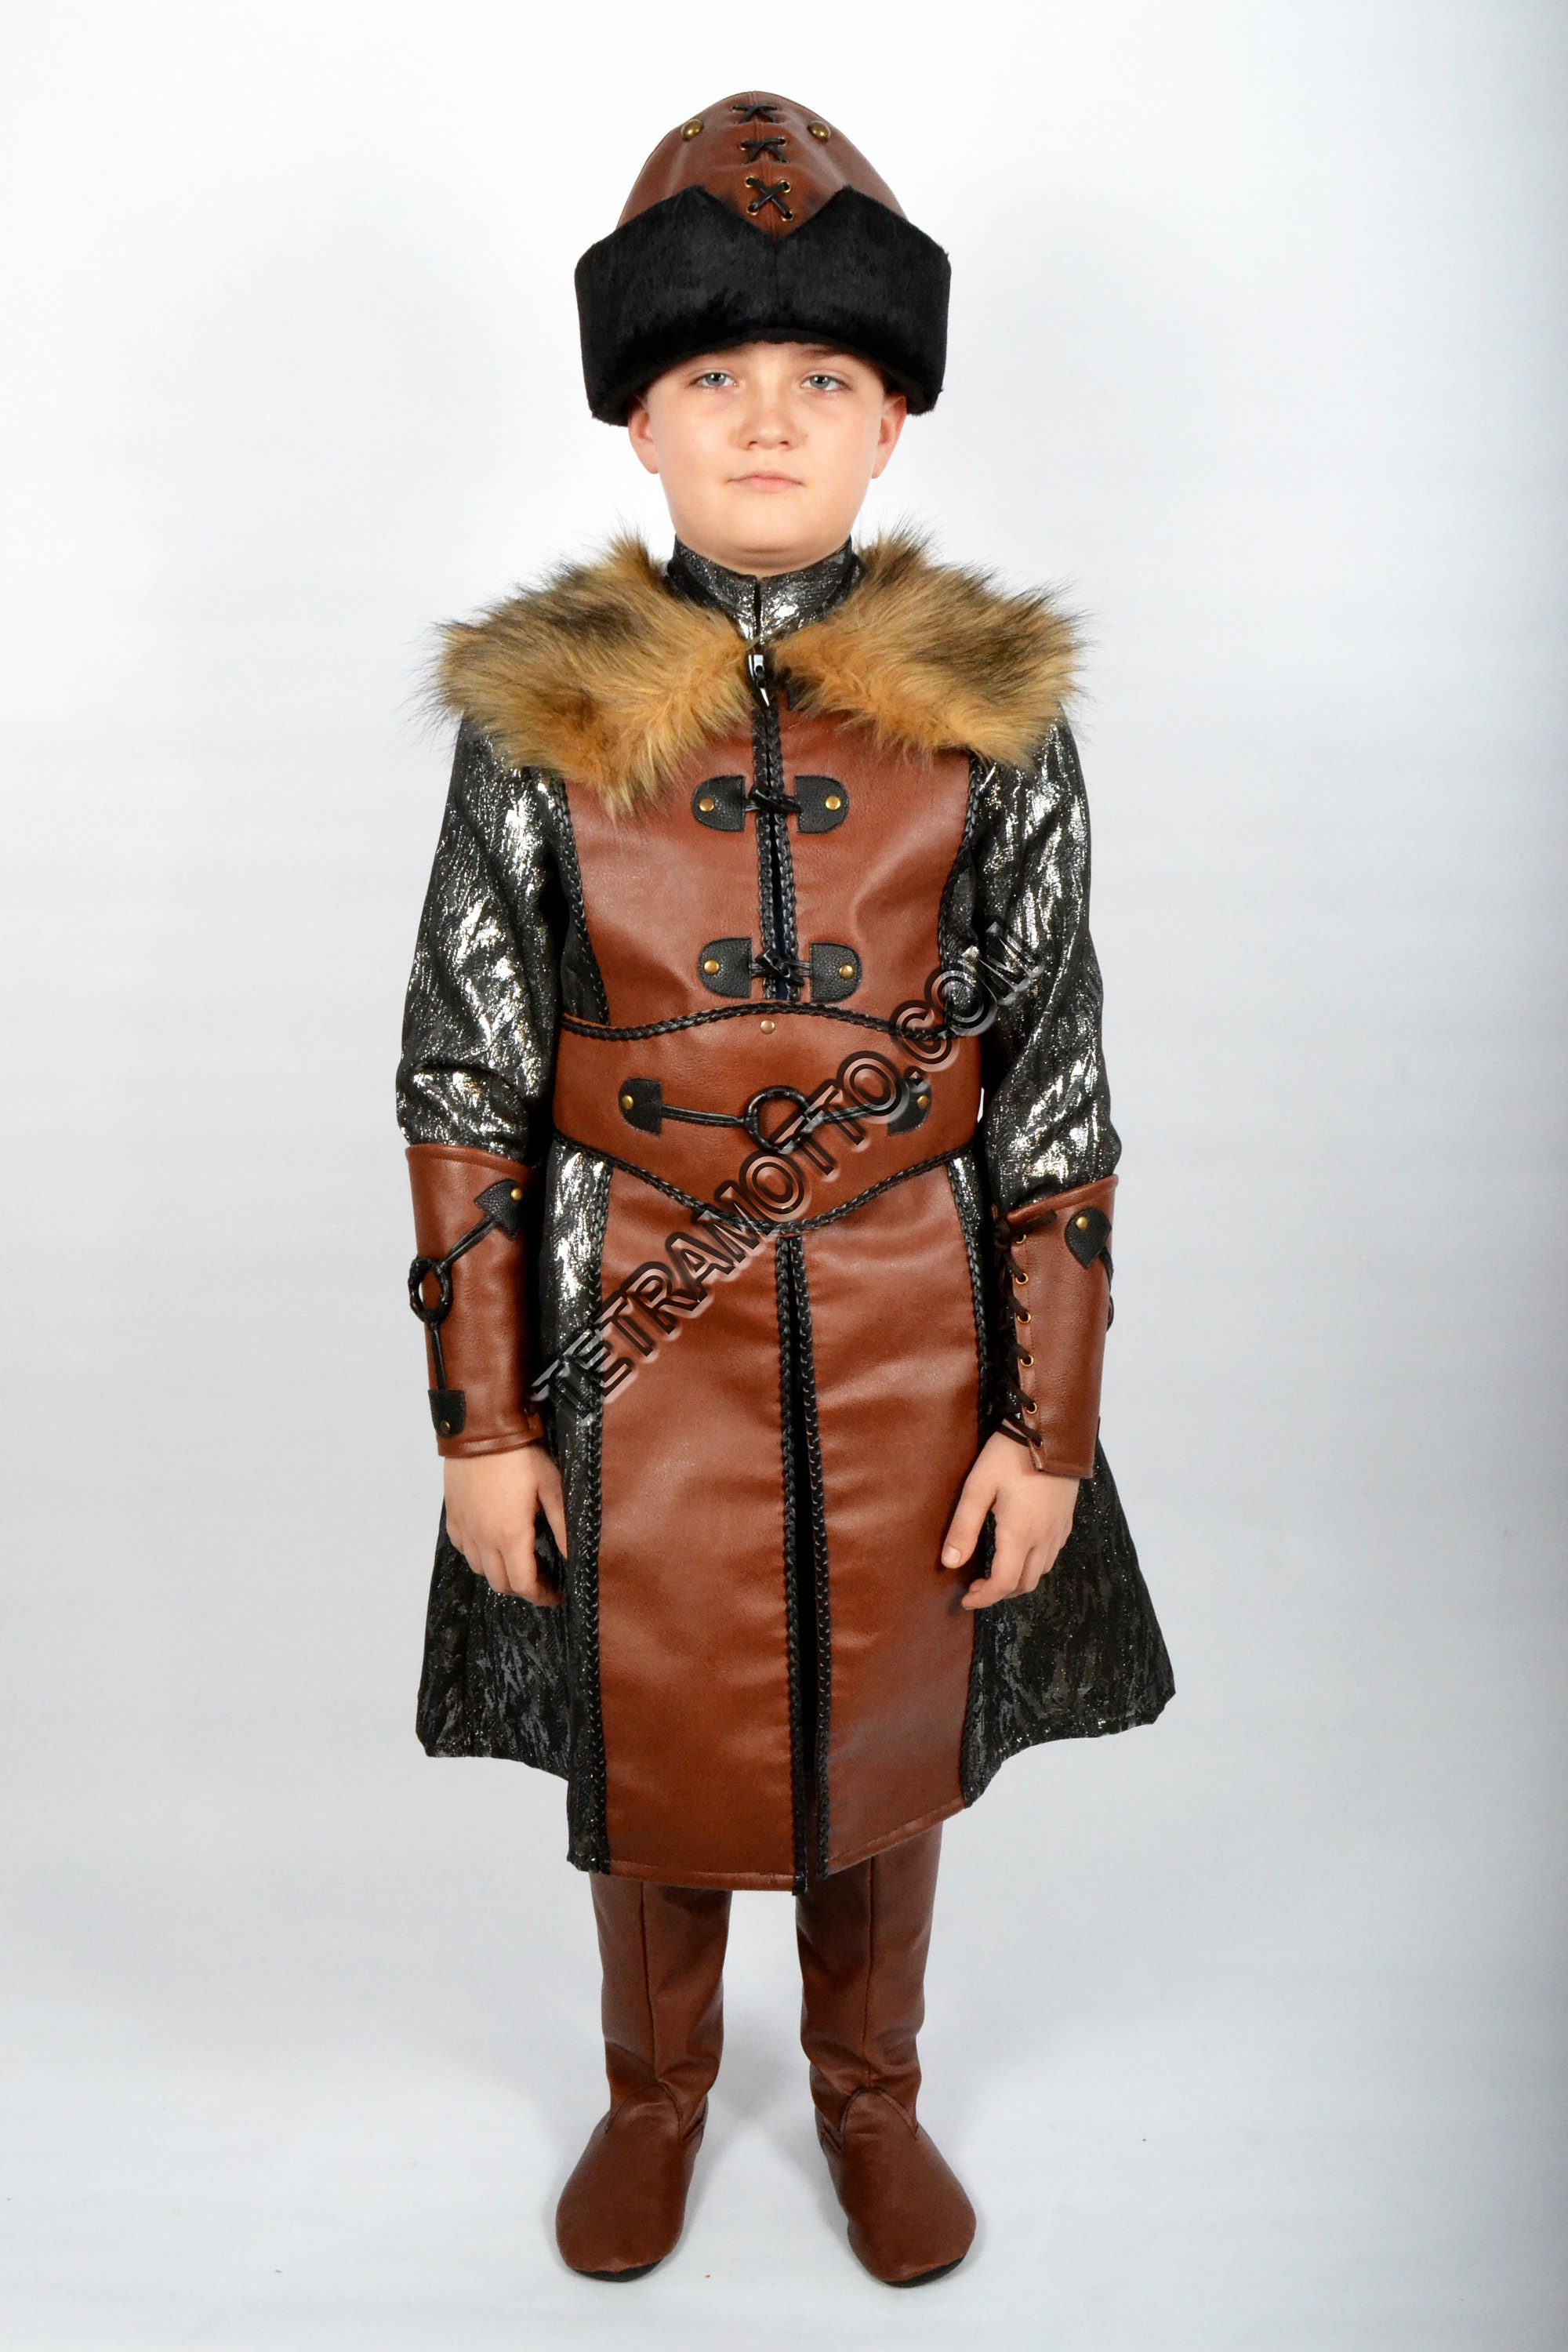 Ertugrul brown leather costume for kids | Etsy